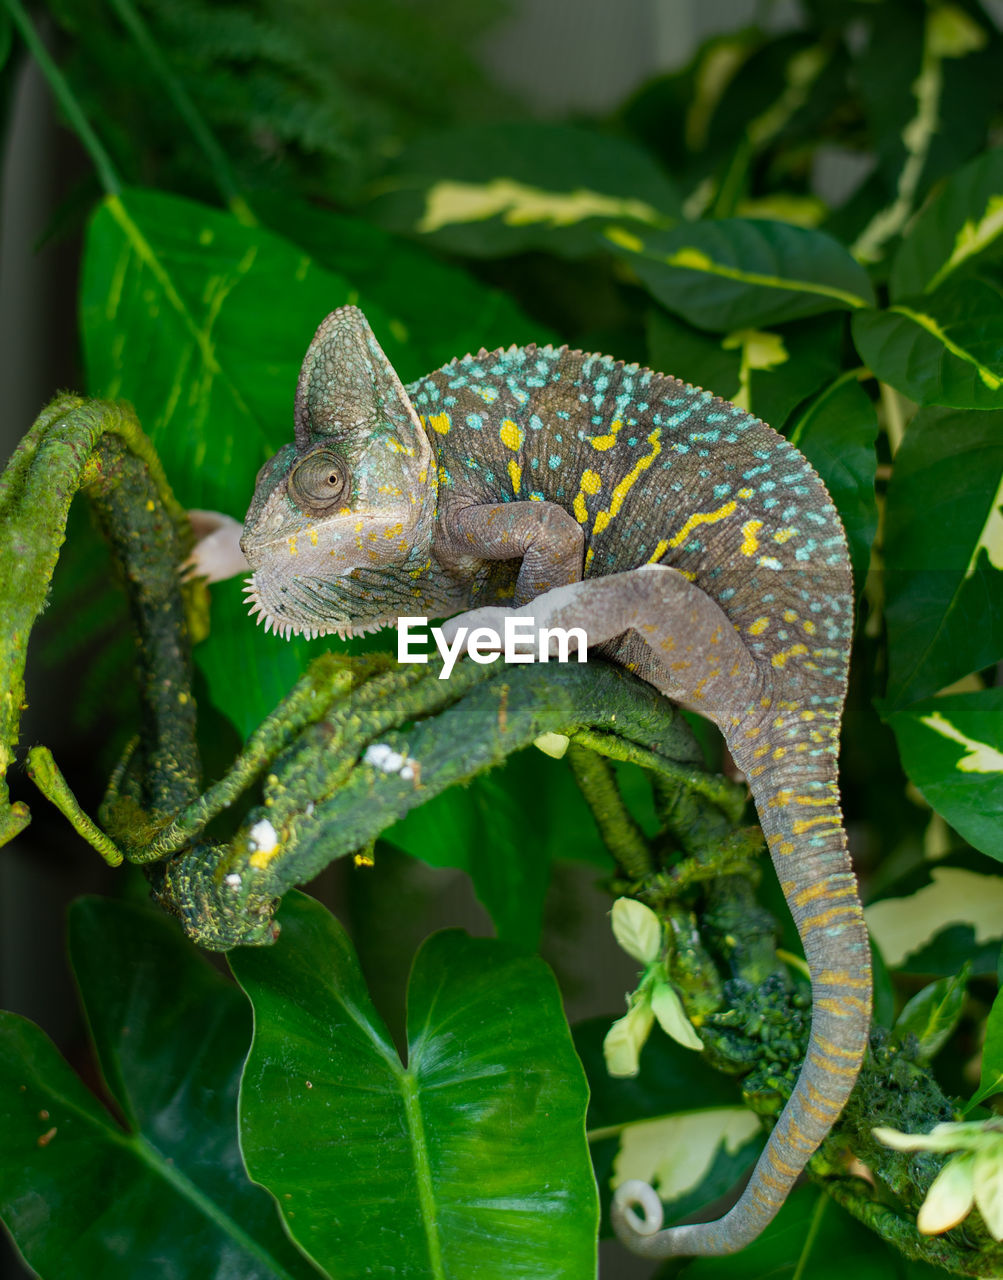 animal themes, animal, animal wildlife, reptile, one animal, chameleon, lizard, plant part, leaf, green, wildlife, nature, common chameleon, tree, jungle, iguania, plant, no people, environment, anole, branch, camouflage, outdoors, rainforest, forest, animal body part, multi colored, portrait, close-up